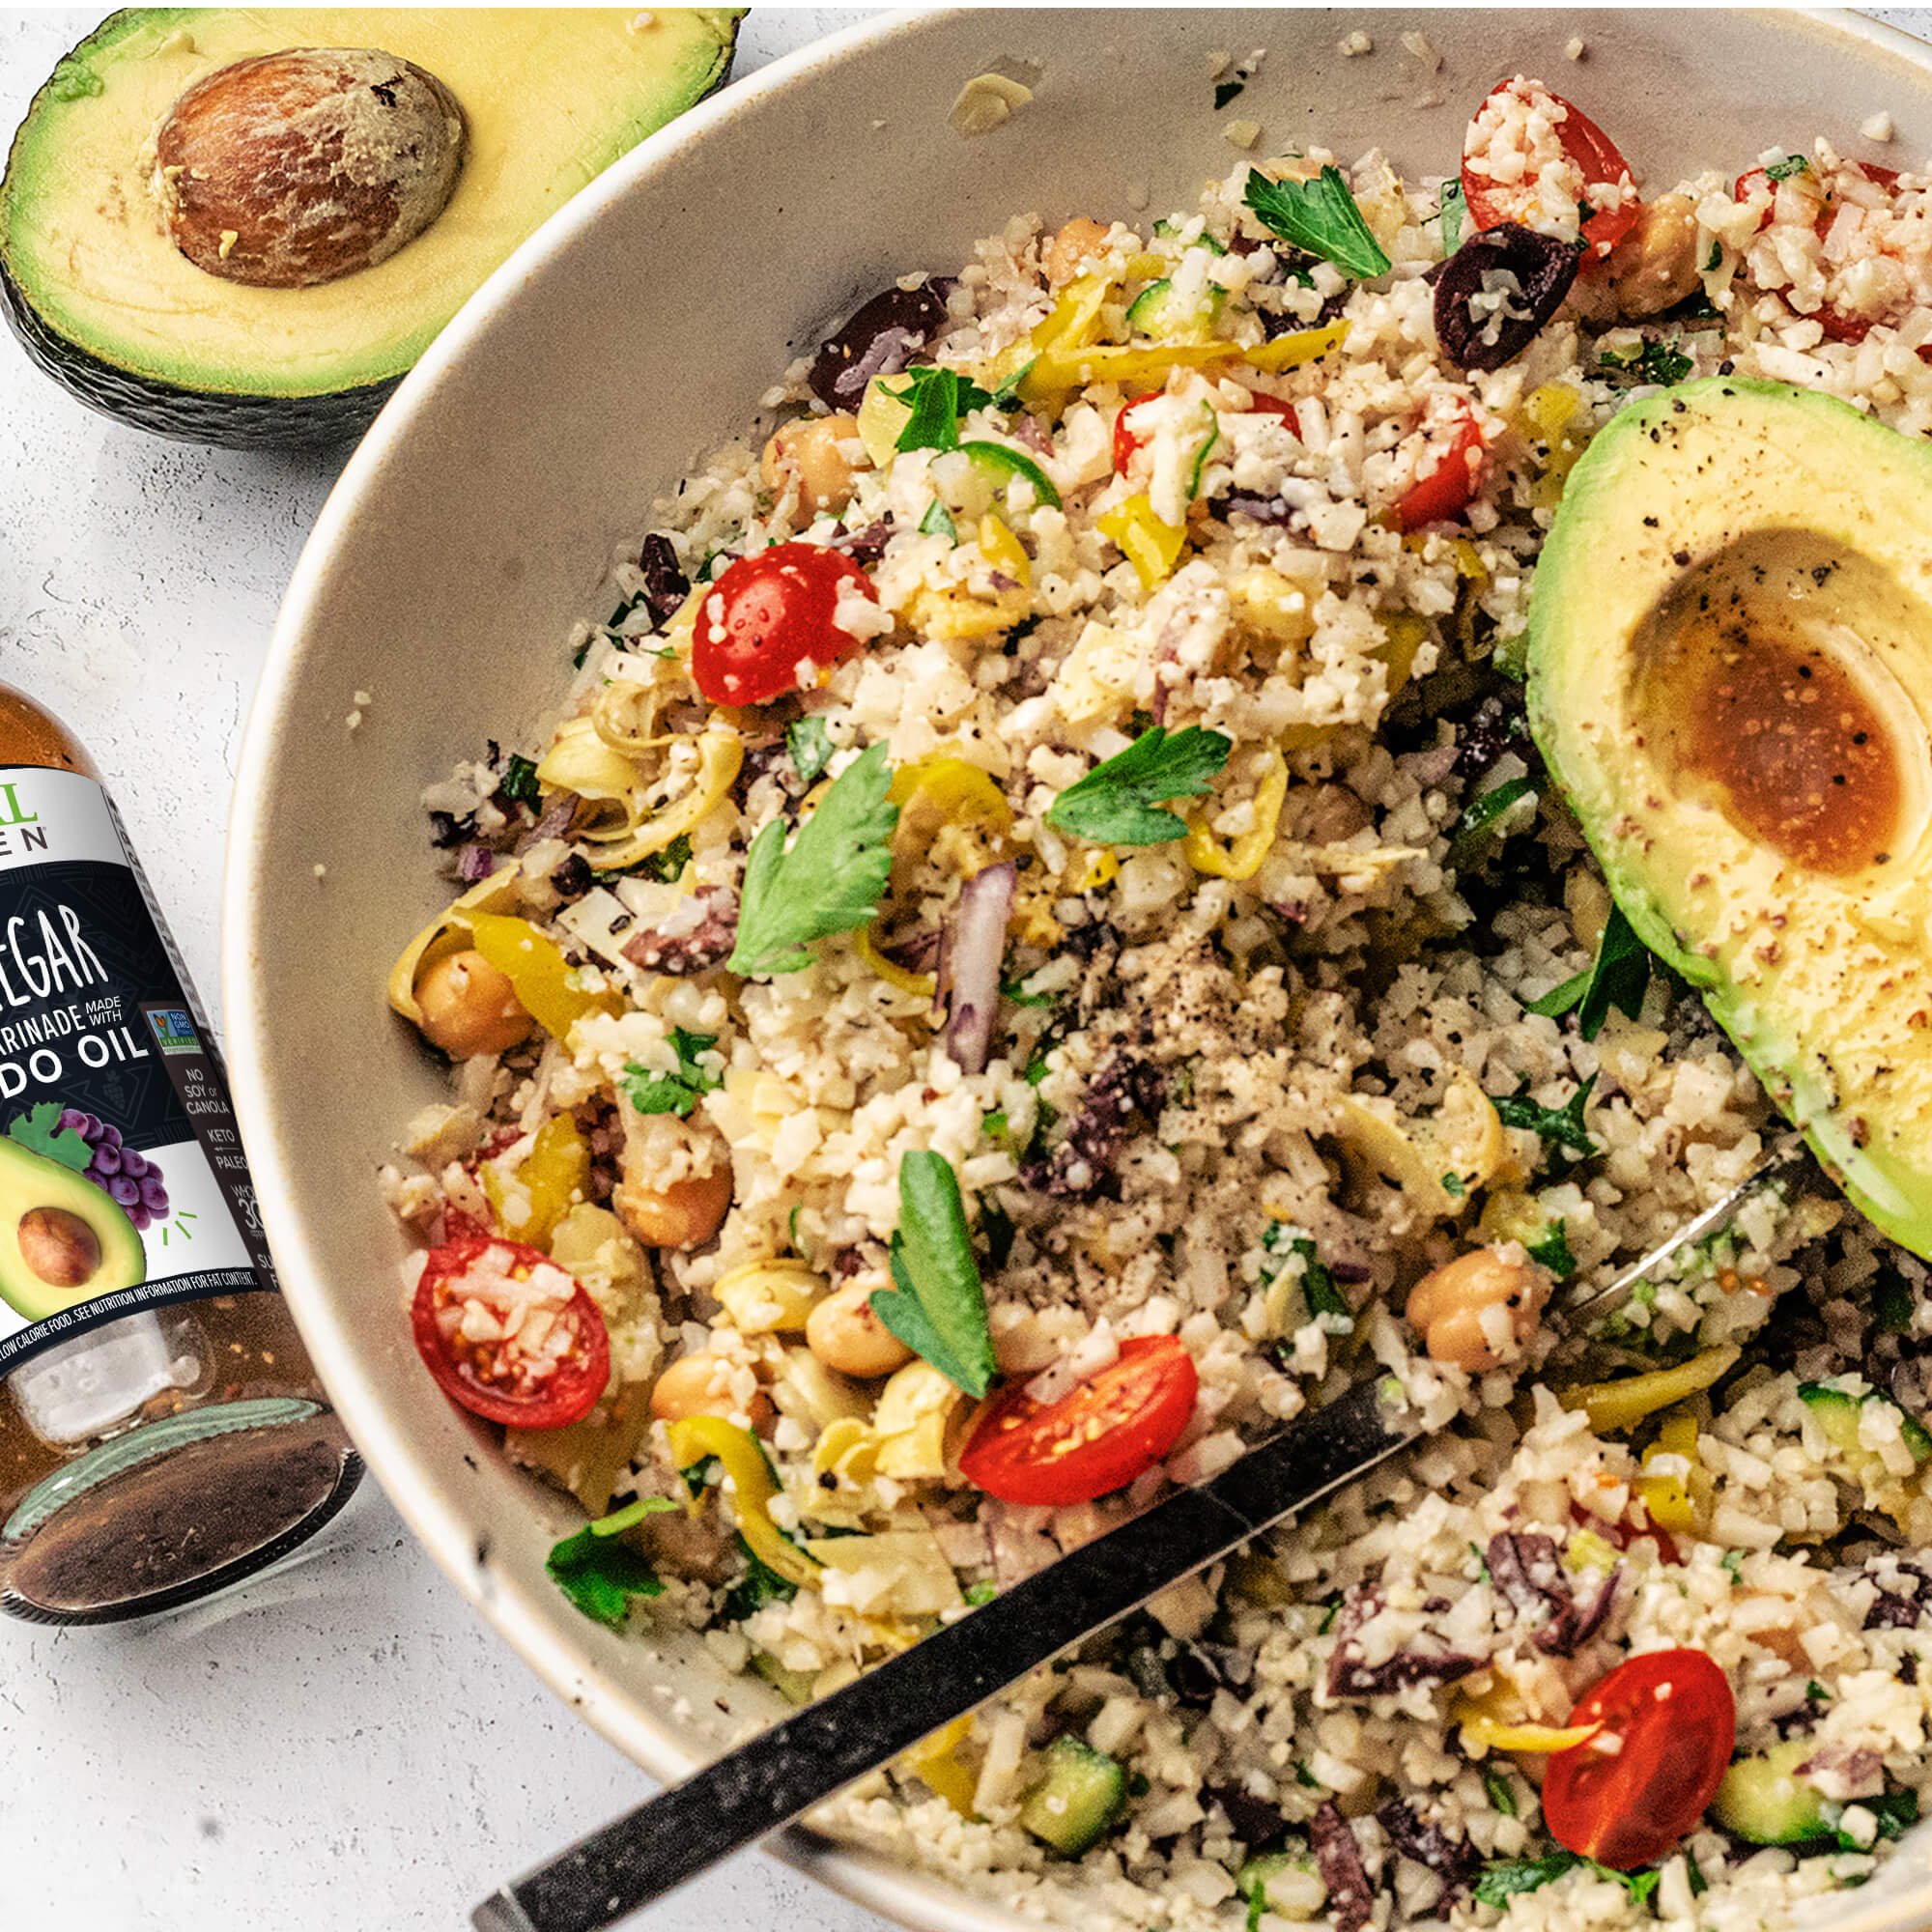 A veggie grain bowl with avocado  and chickpeas, next to a bottle of Primal Kitchen Avocado Oil and Vinegar Dressing and a sliced avocado half.